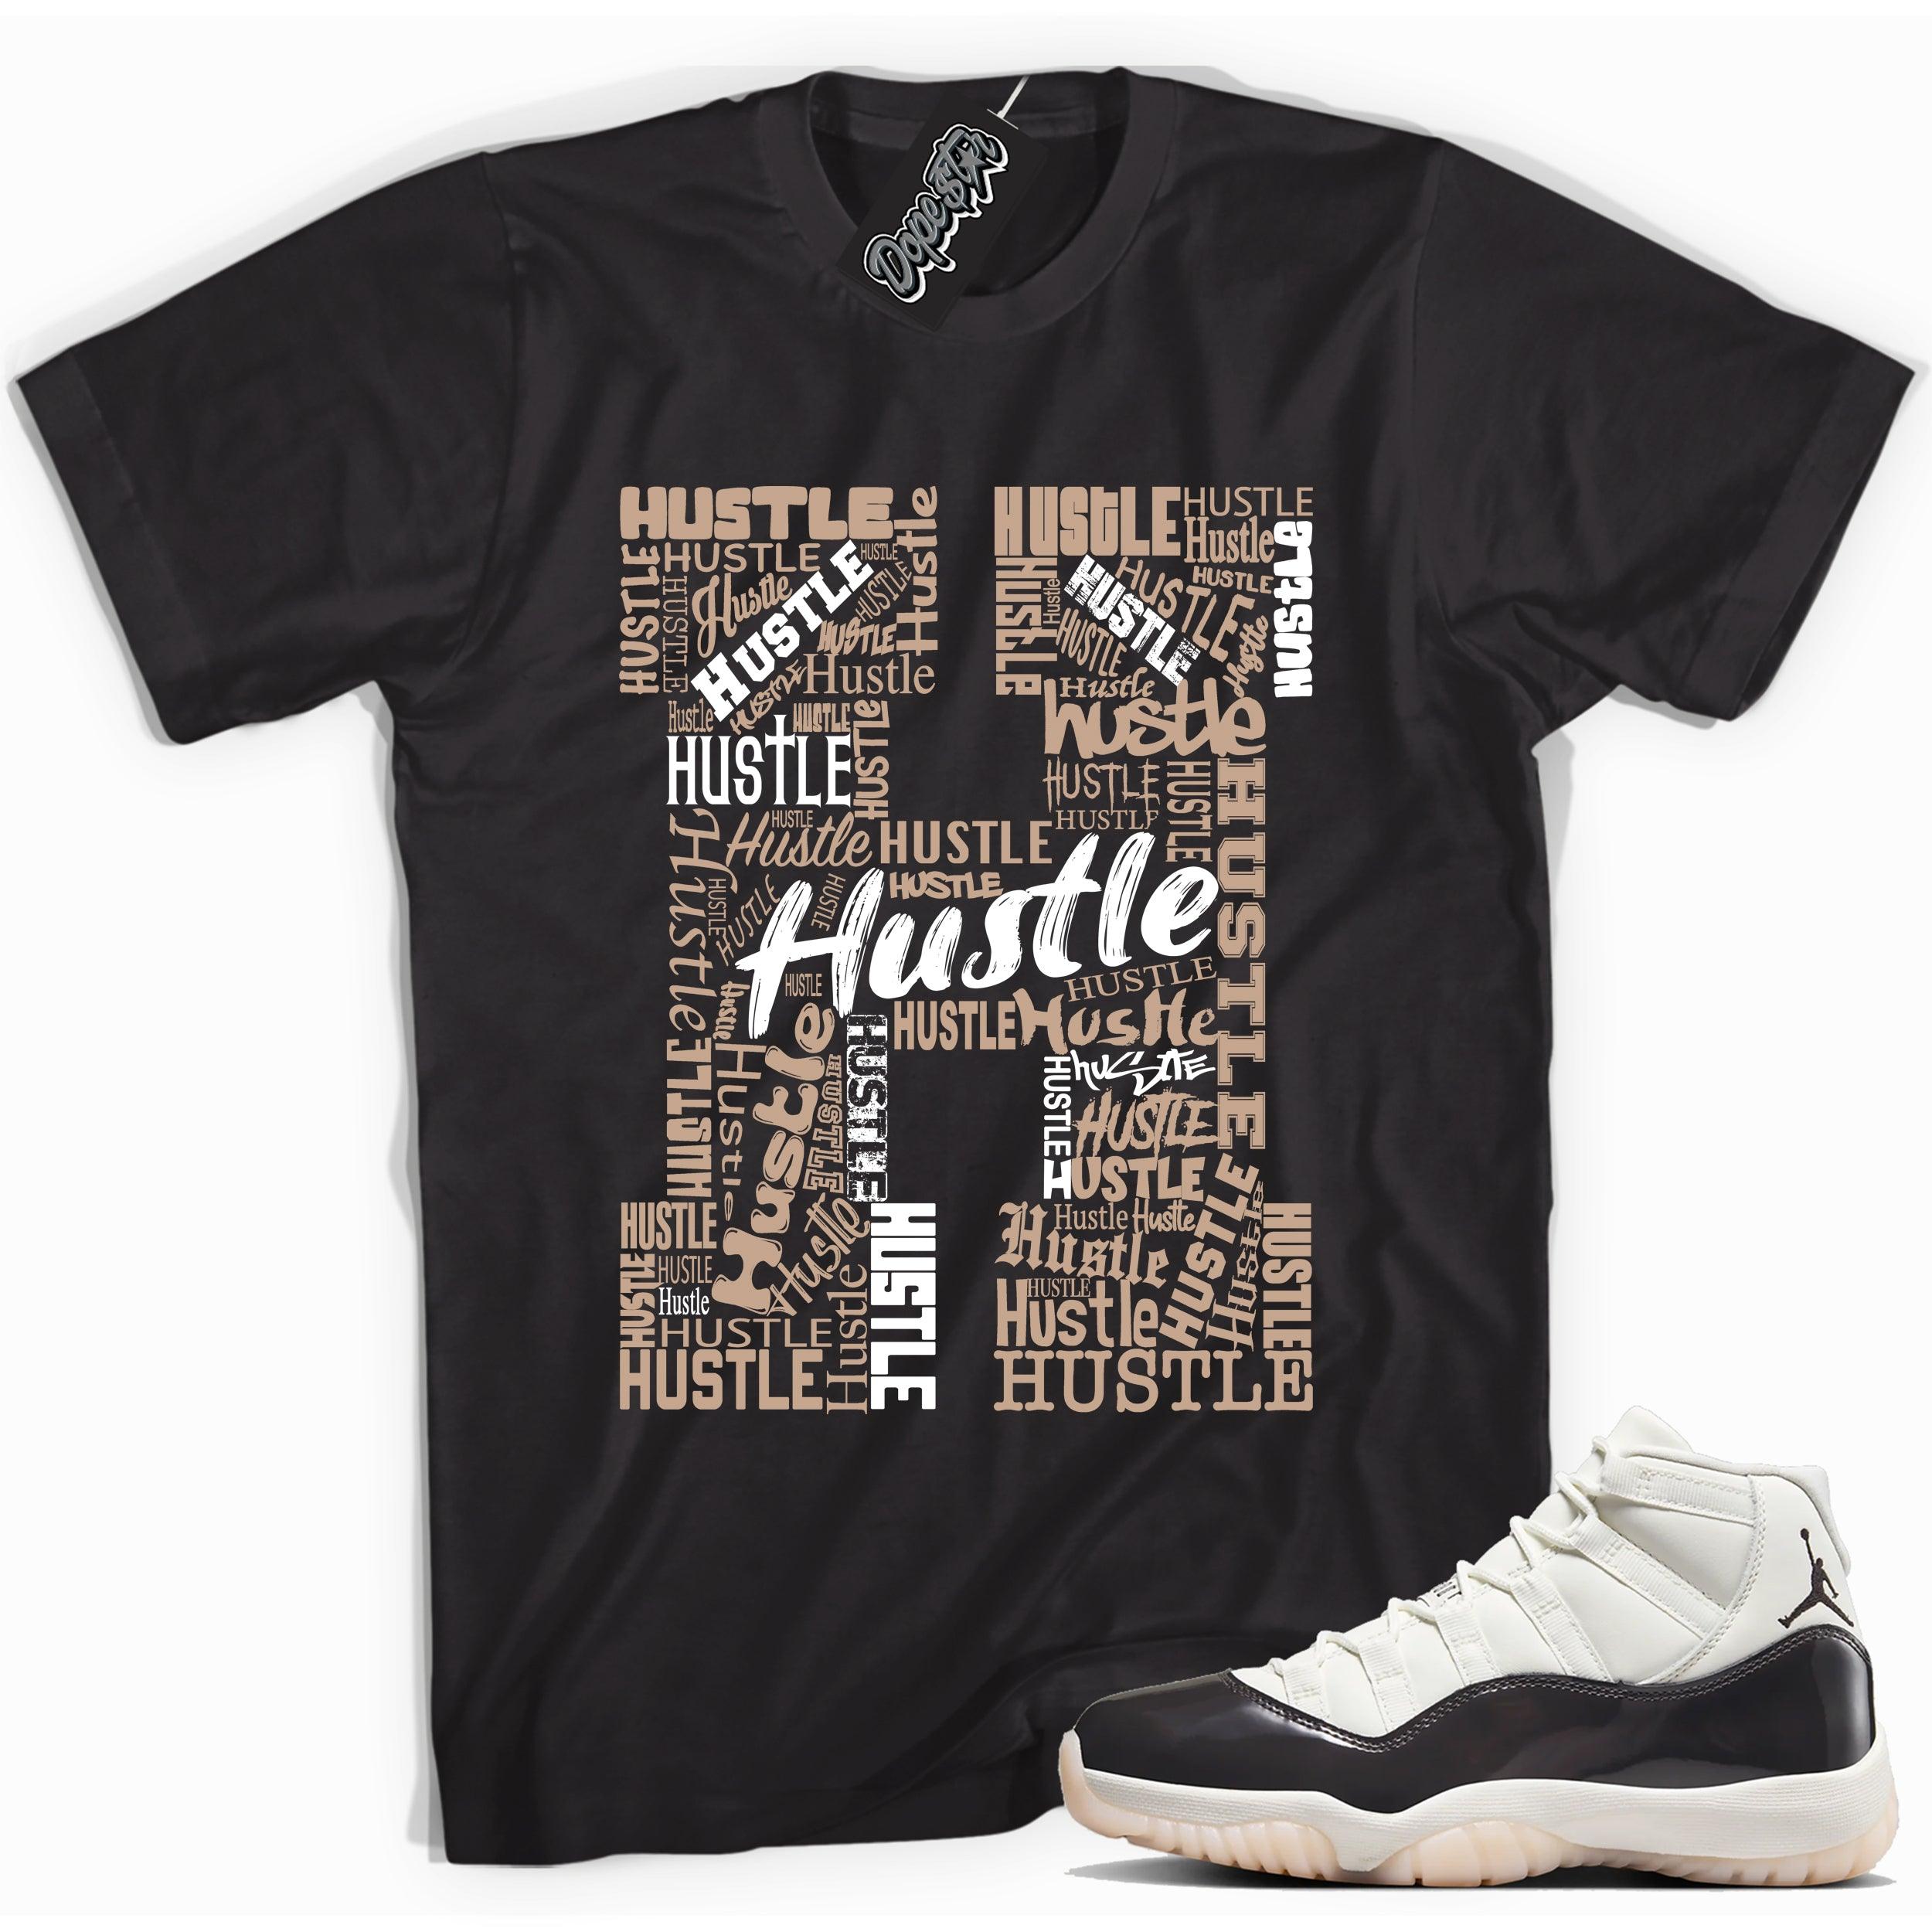 Cool Black graphic tee with “ Hustle H ” print, that perfectly matches Air Jordan 11 Neapolitan sneakers 